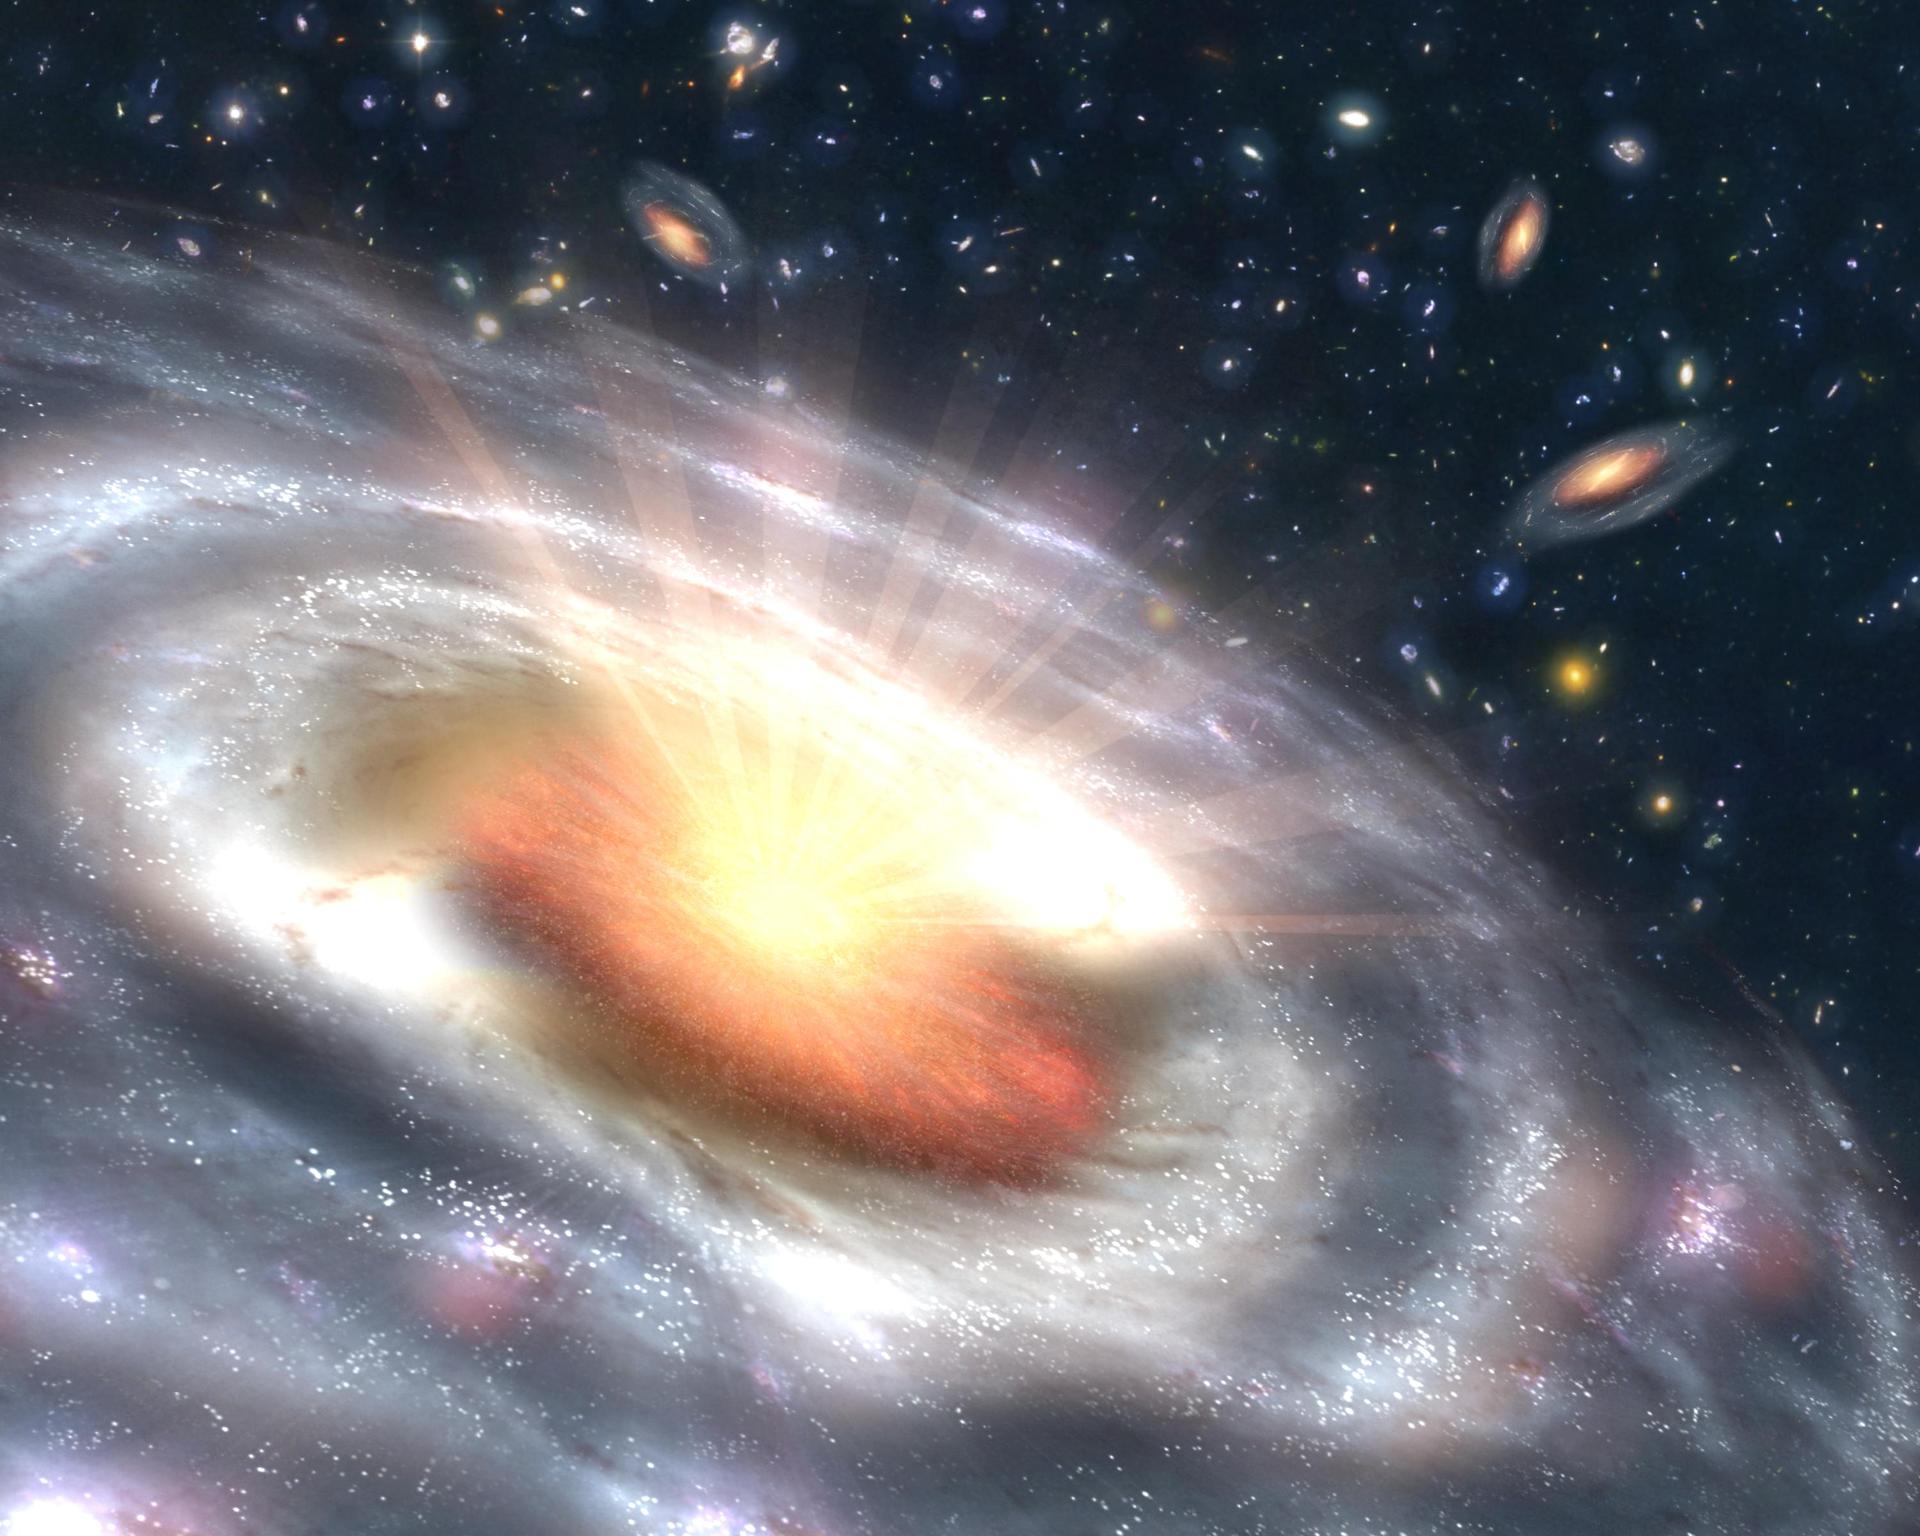 An artist’s conception of a quasar surrounded by other galaxies